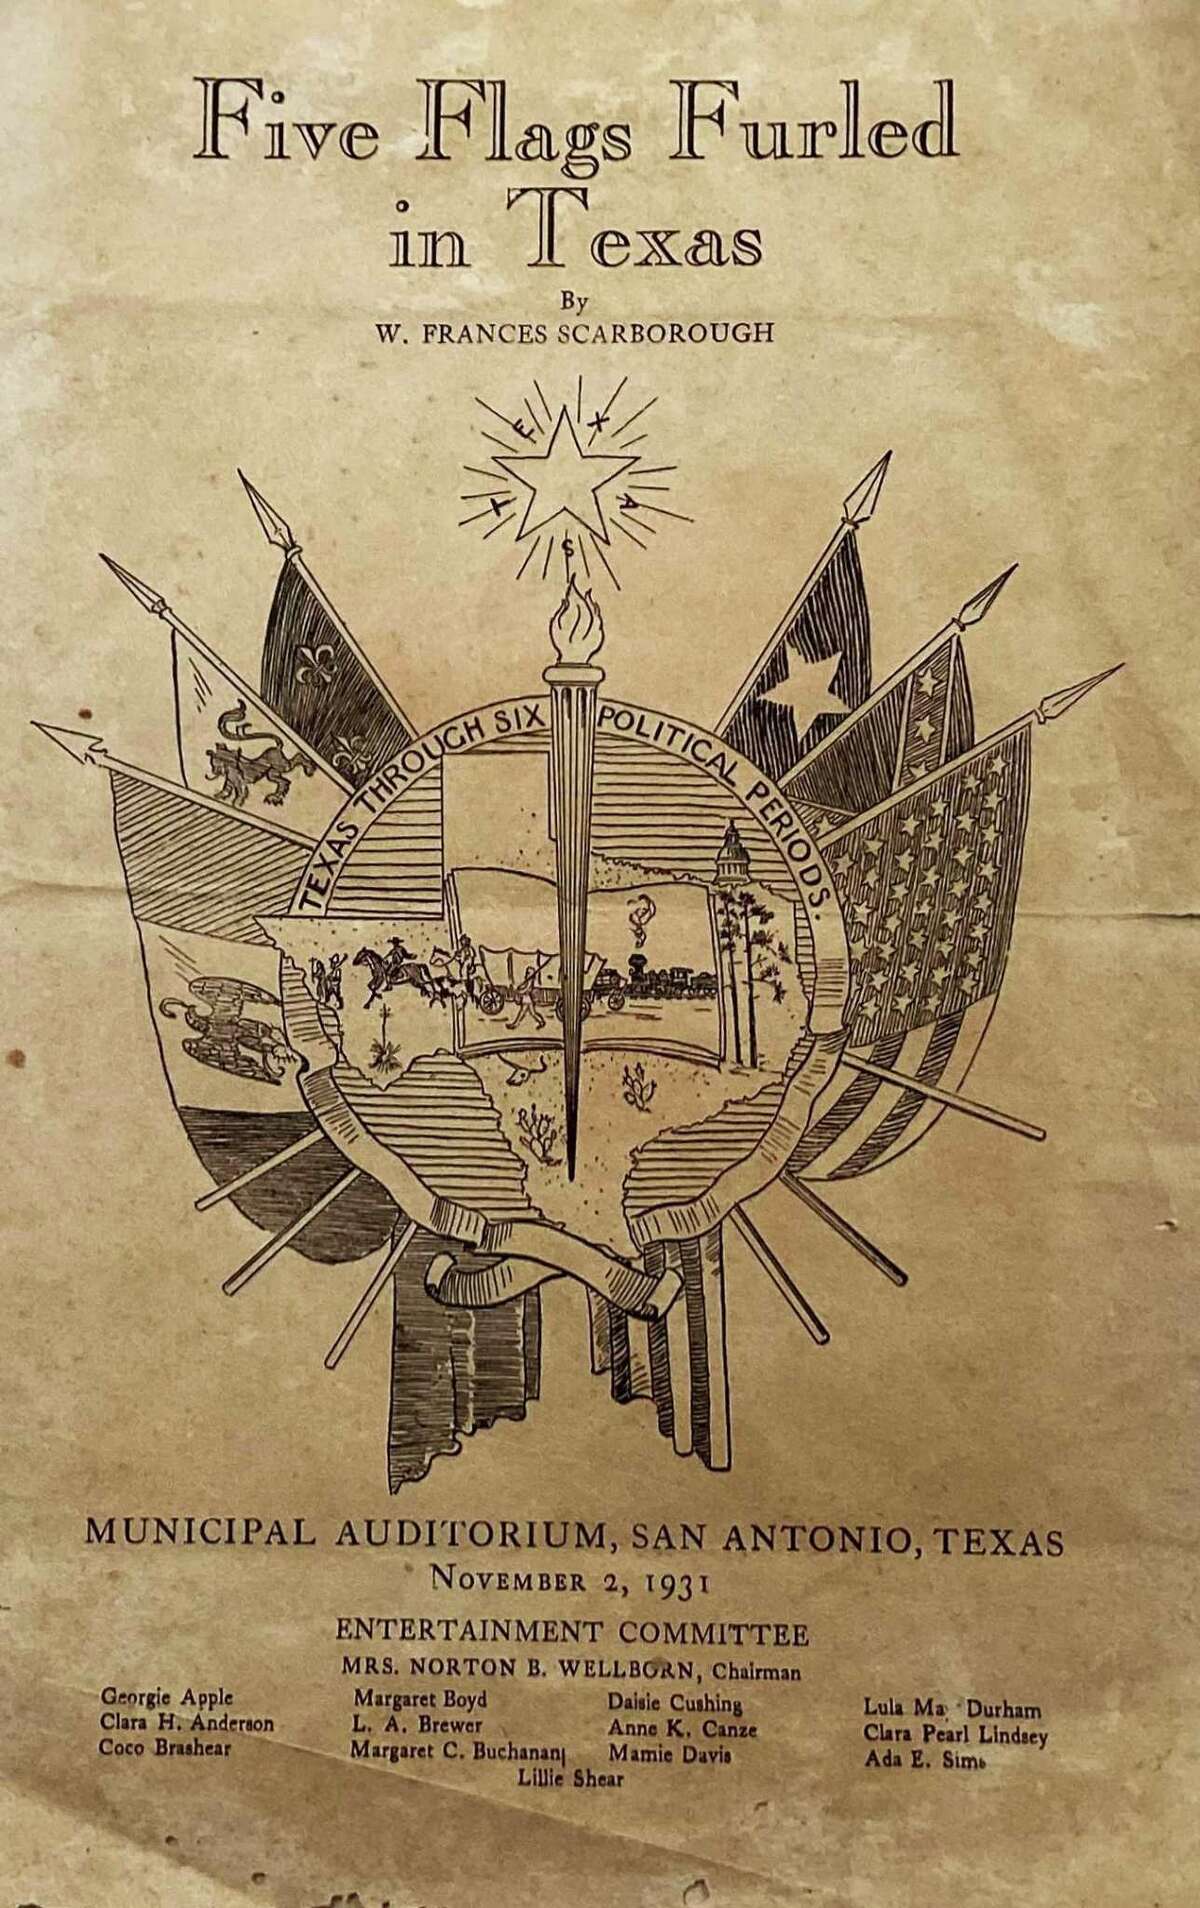 A Texas history play by local writer W. Frances Scarborough was originally intended to be a part of the city’s March 4-9, 1931, bicentennial observance but seems to have been reworked and postponed to serve as entertainment for the Nov. 2-5, 1931, convention of the Order of the Eastern Star, a Masonic organization for women.